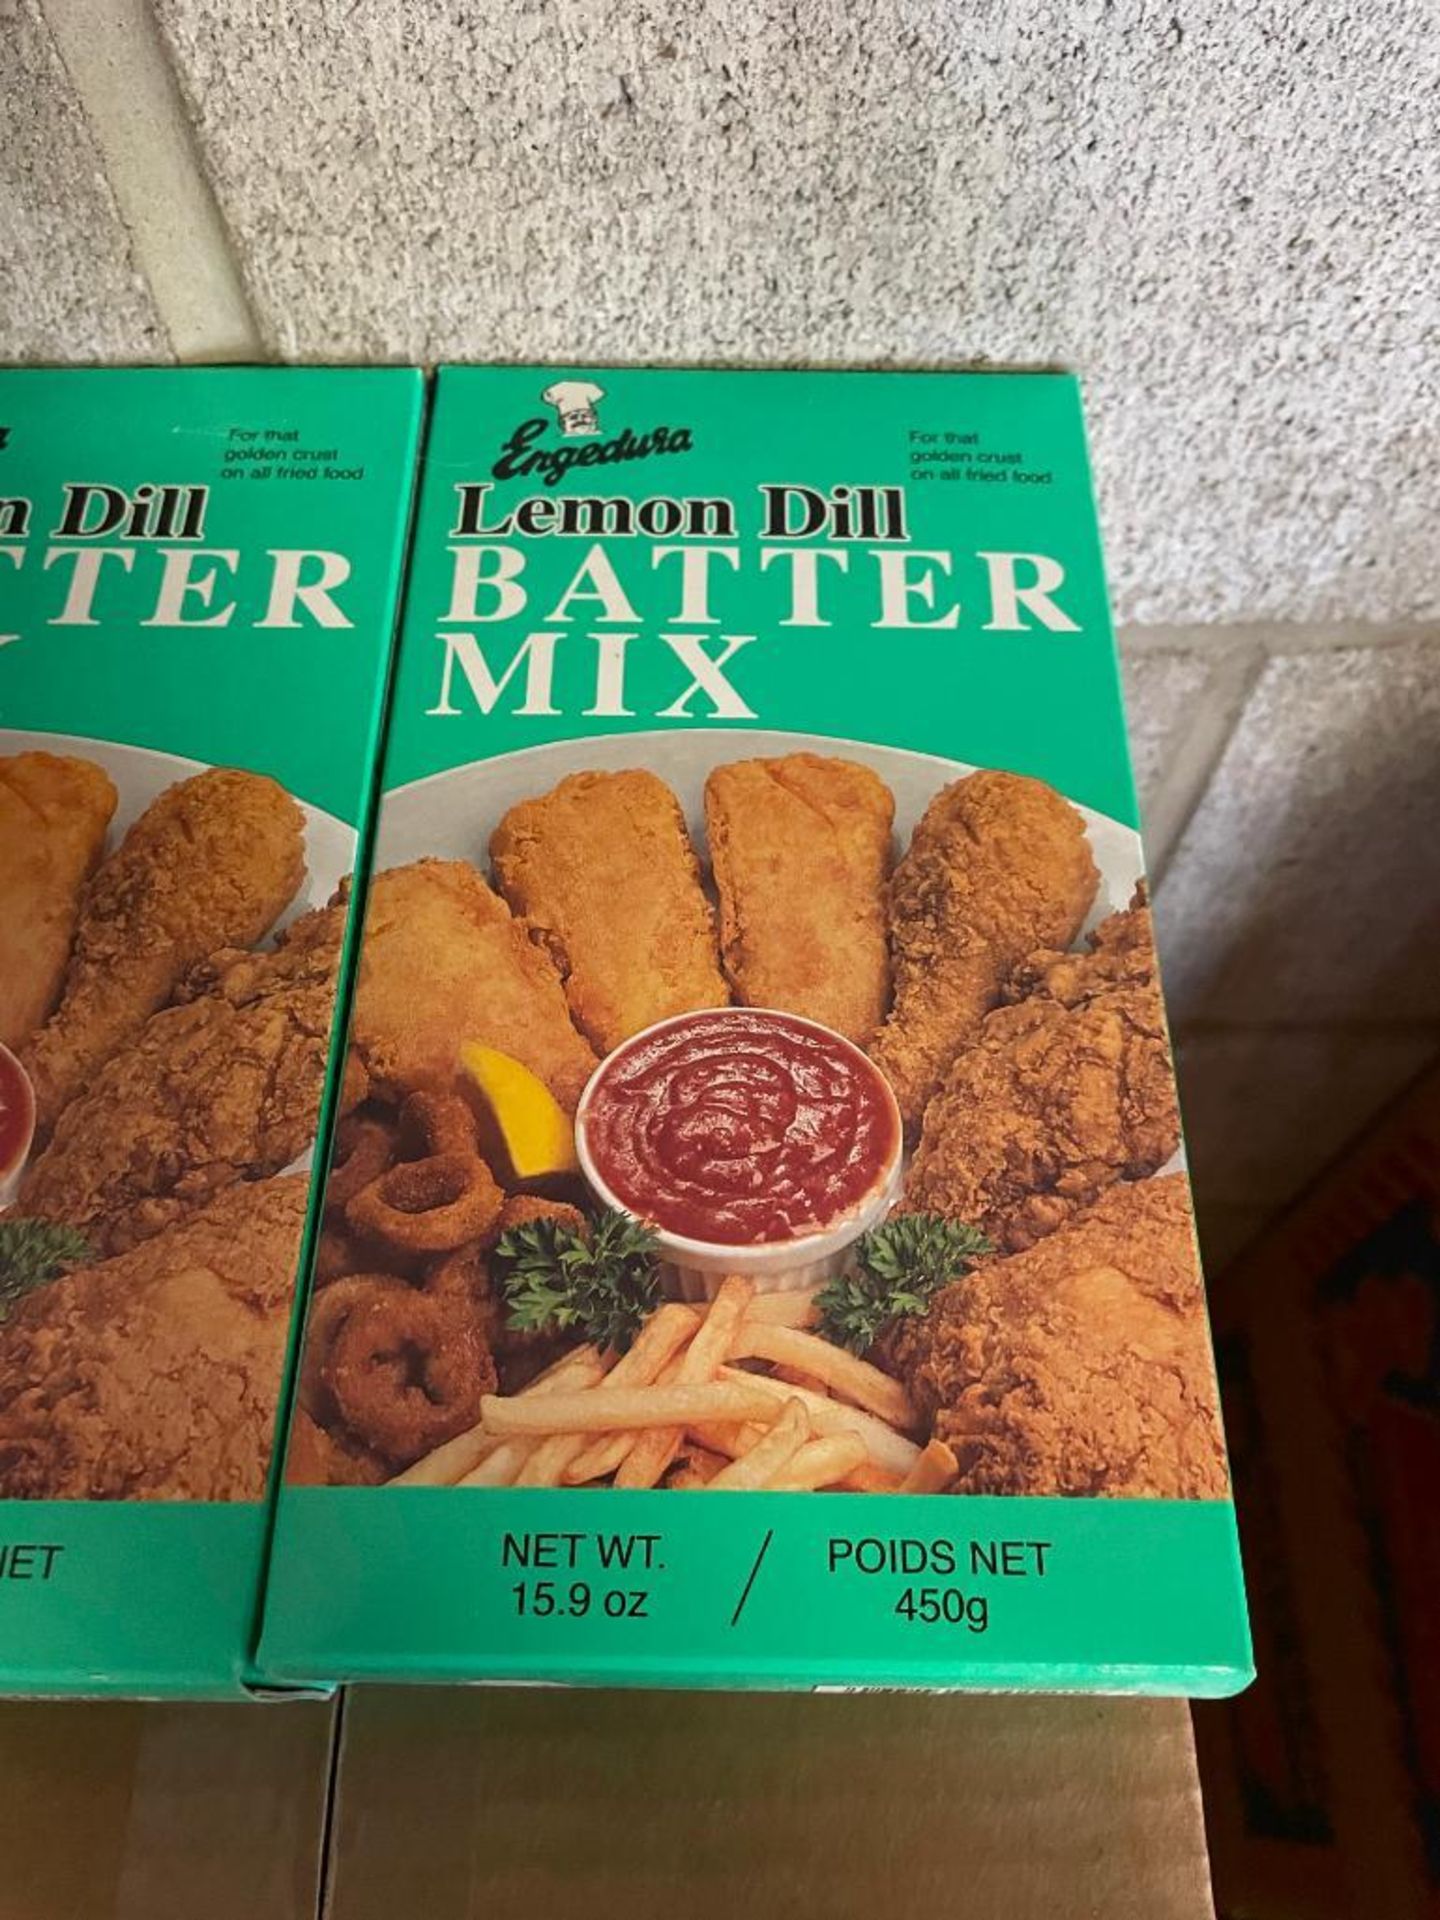 (6) CASES OF ENGEDURA LEMON DILL BATTER MIX, 12/450G BOXES PER CASE - Image 3 of 3